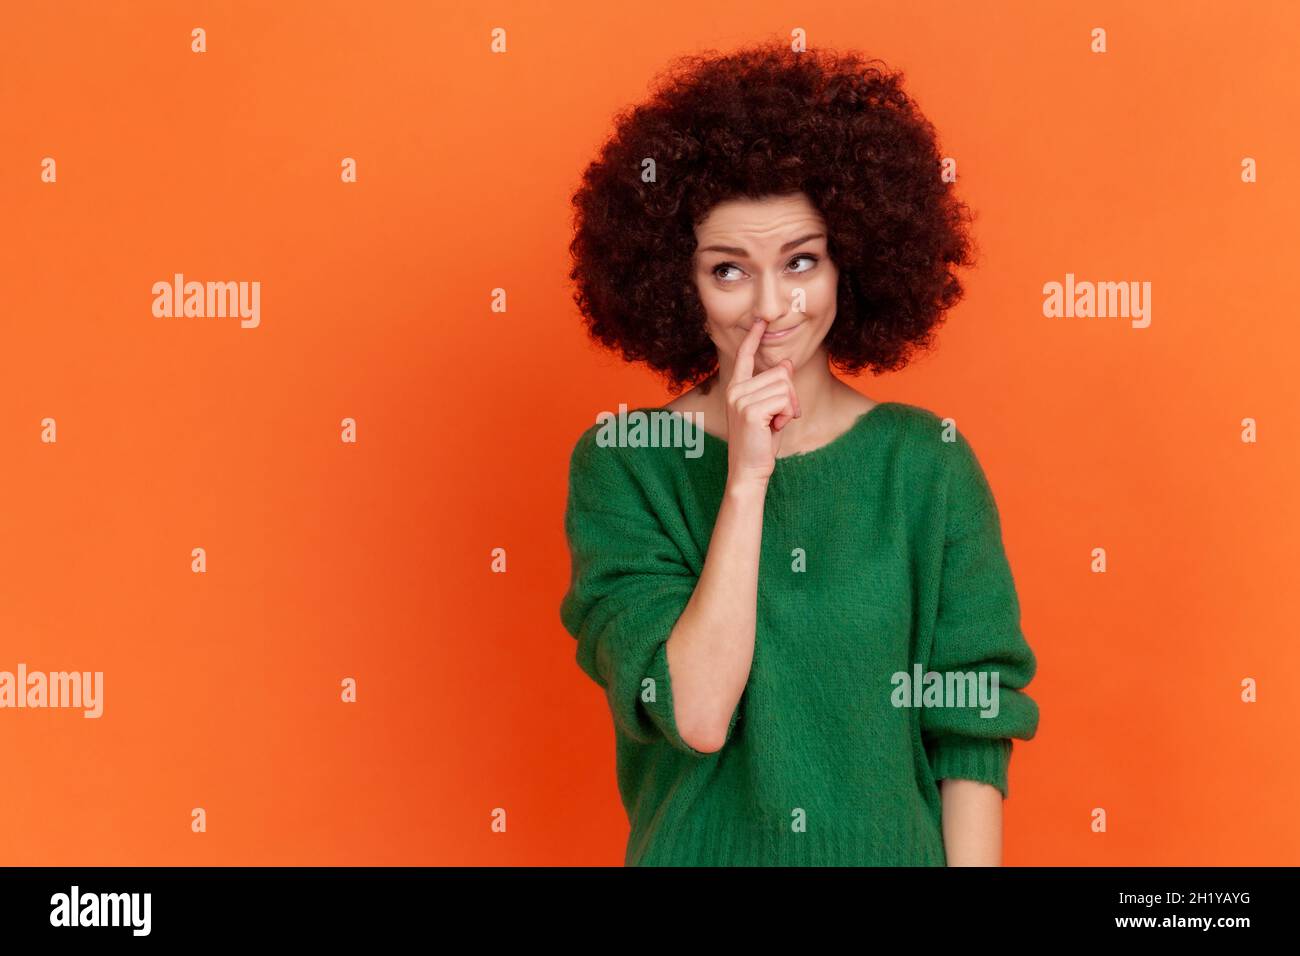 Funny woman with Afro hairstyle wearing green casual style sweater picking her nose, demonstrating bad manners, childish behavior. Indoor studio shot isolated on orange background. Stock Photo